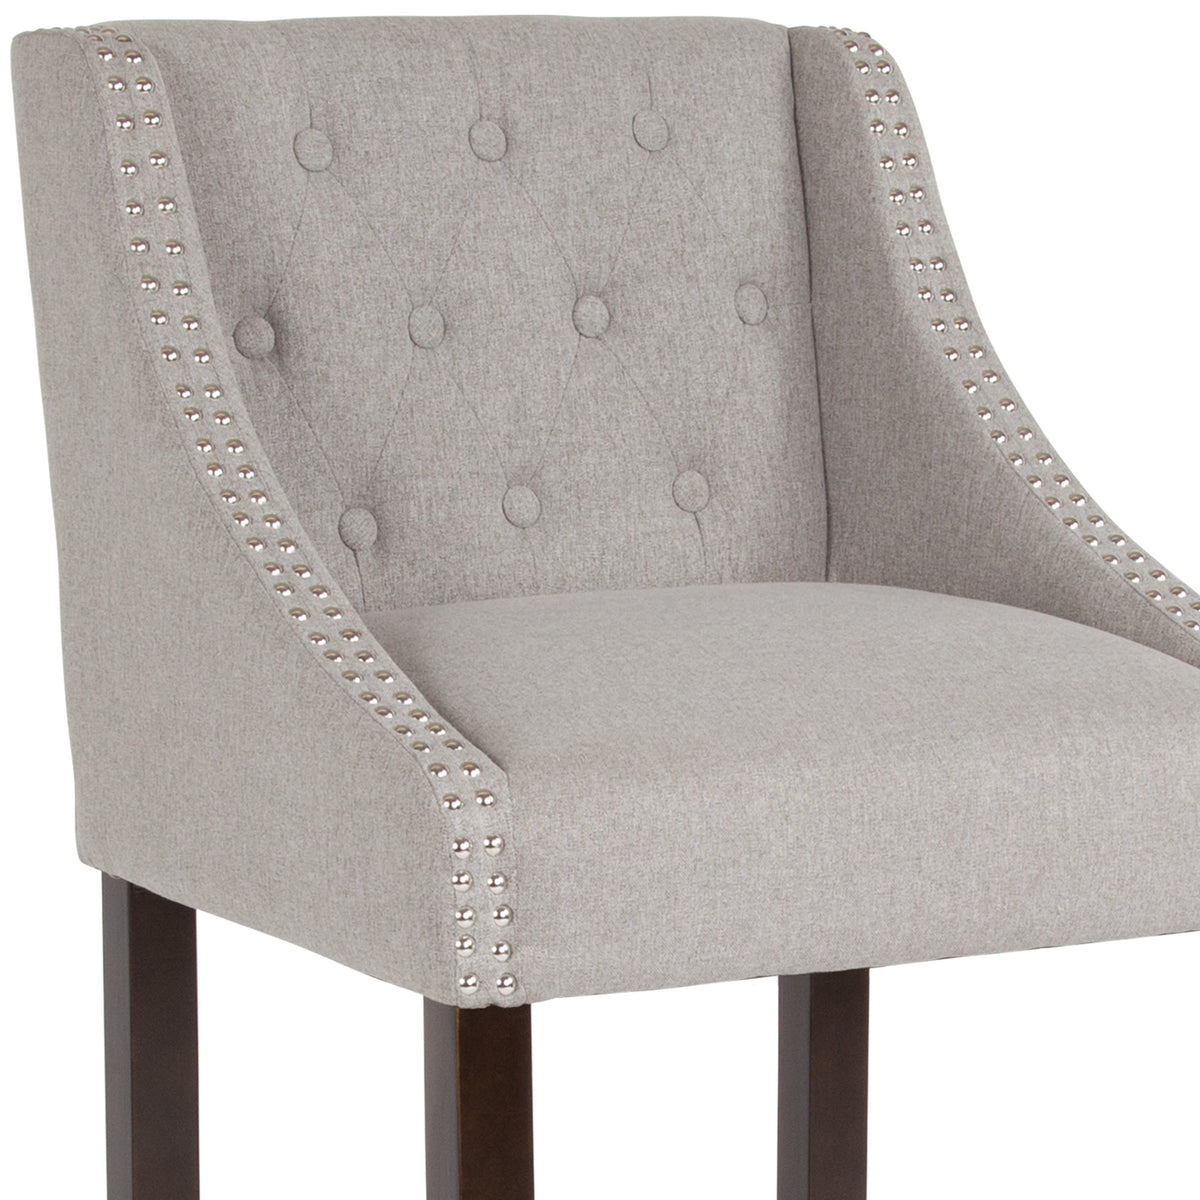 Light Gray Fabric |#| 30inch High Tufted Walnut Barstool with Accent Nail Trim in Light Gray Fabric